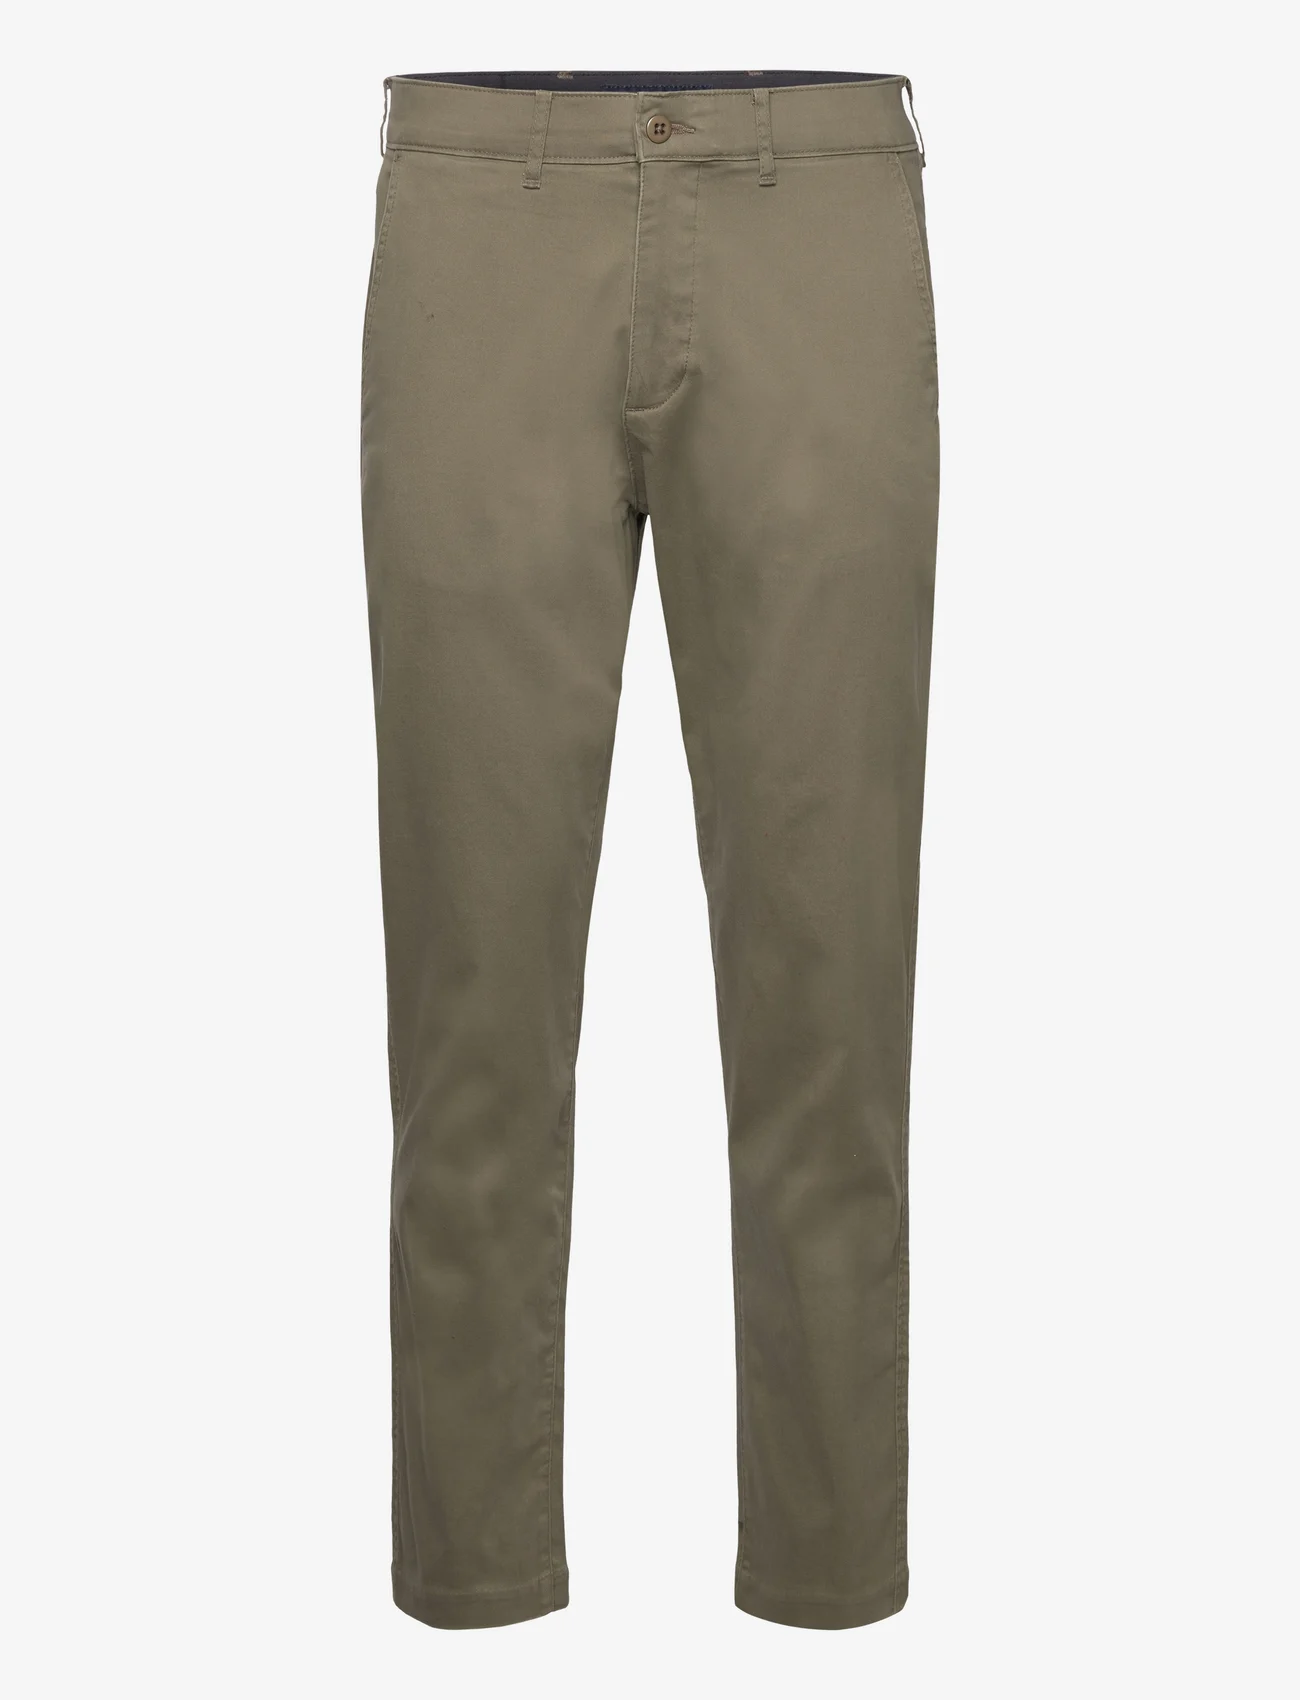 Abercrombie & Fitch - ANF MENS PANTS - chino püksid - grape leaf - 0